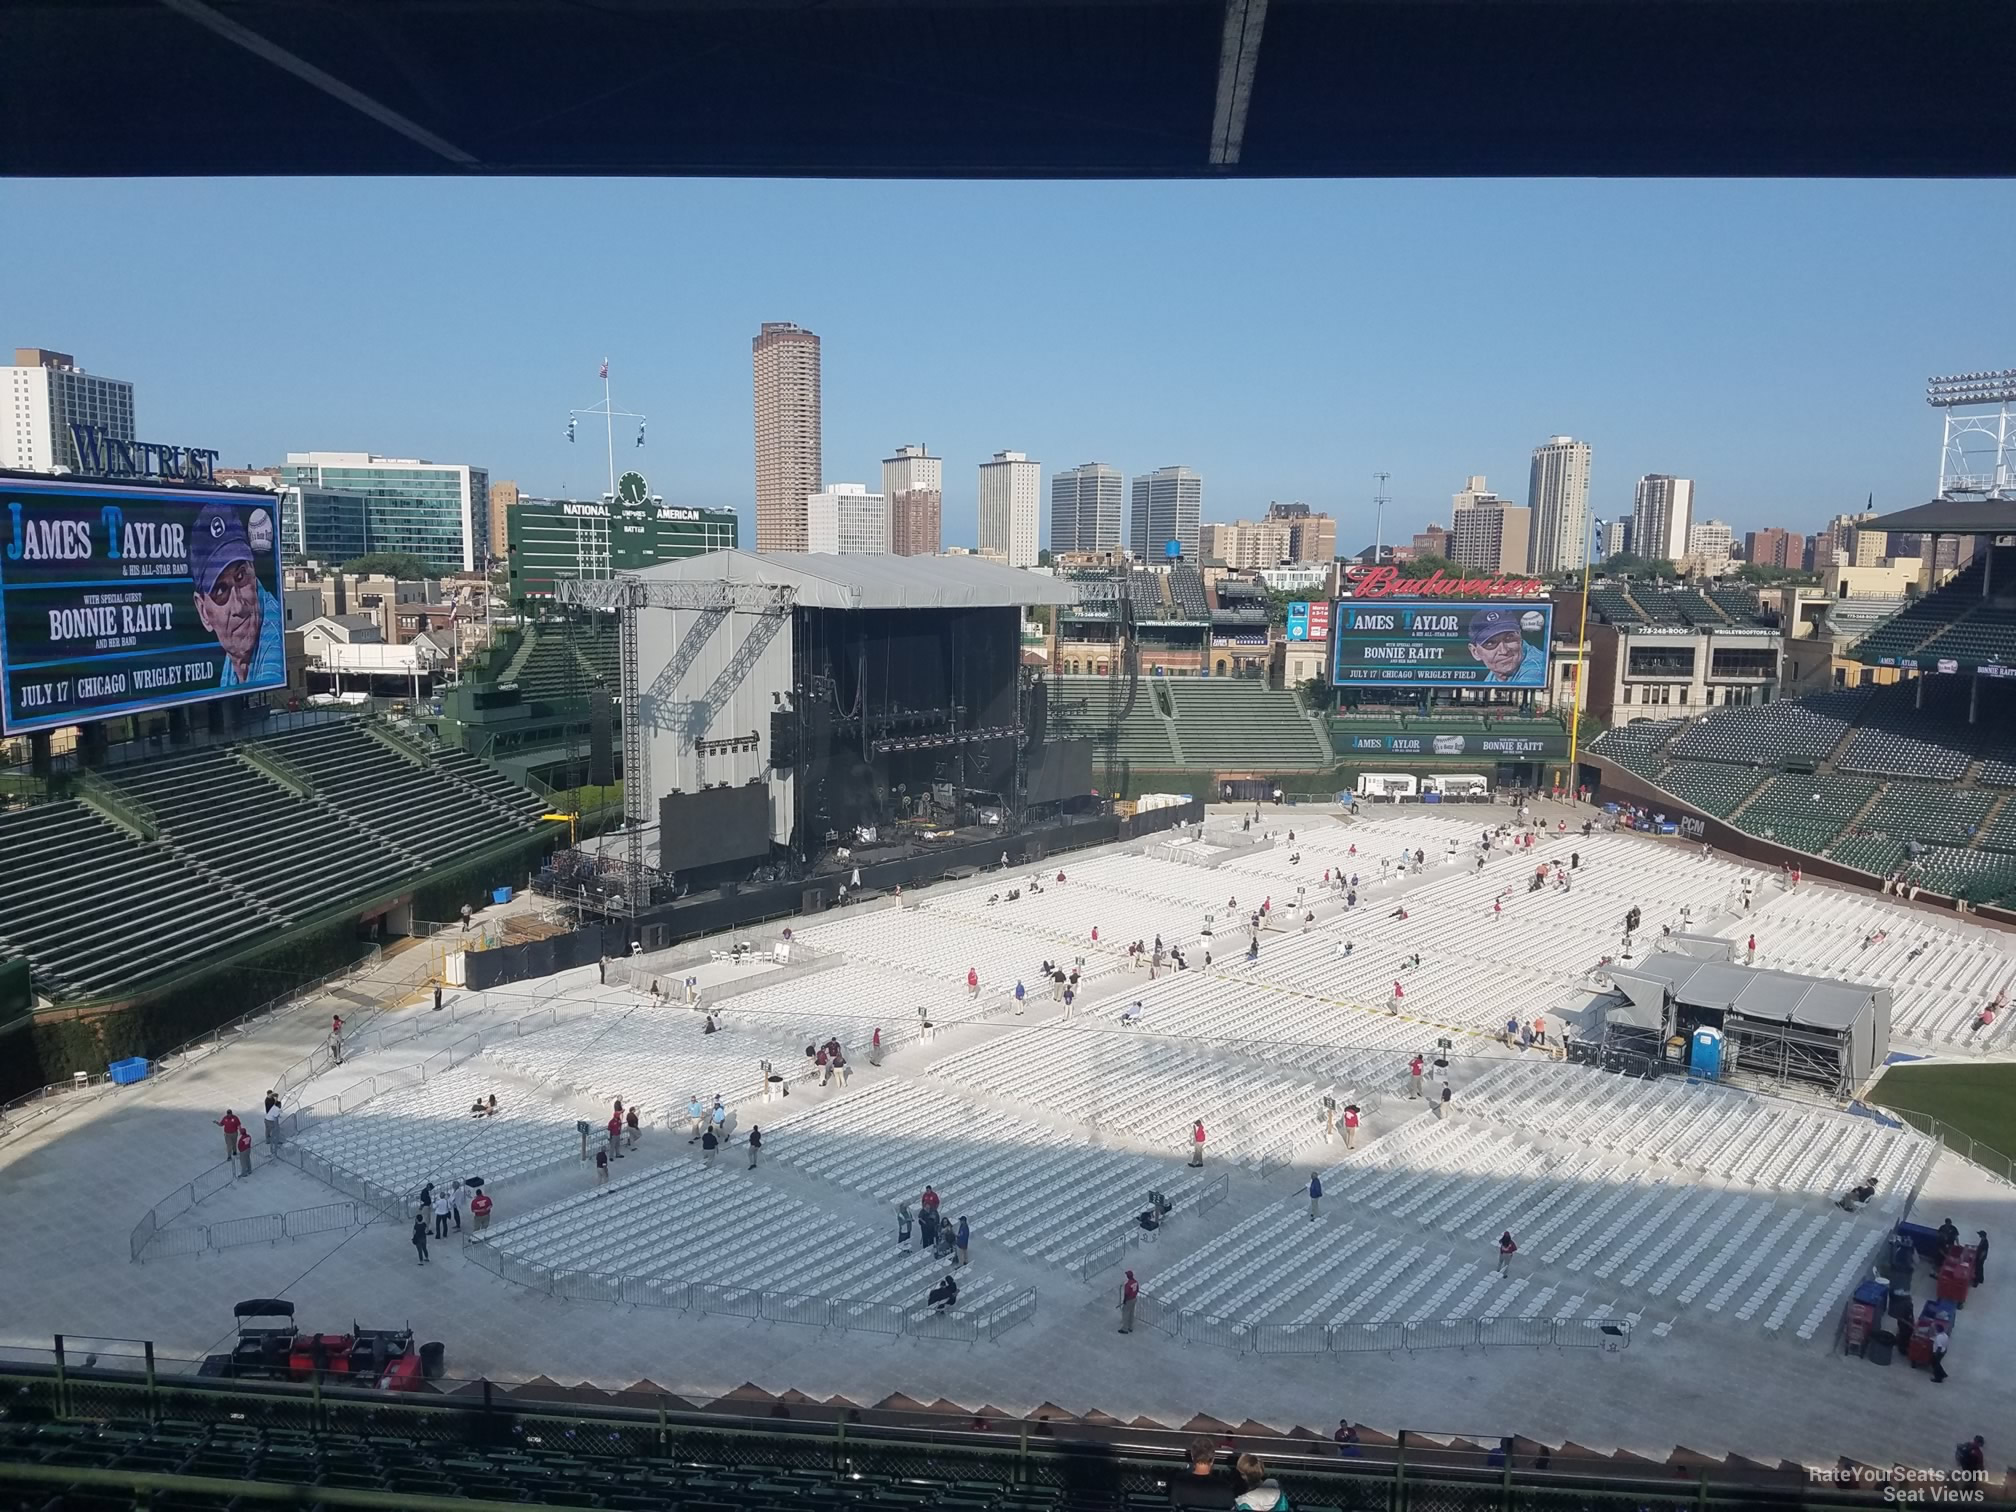 section 407, row 4 seat view  for concert - wrigley field